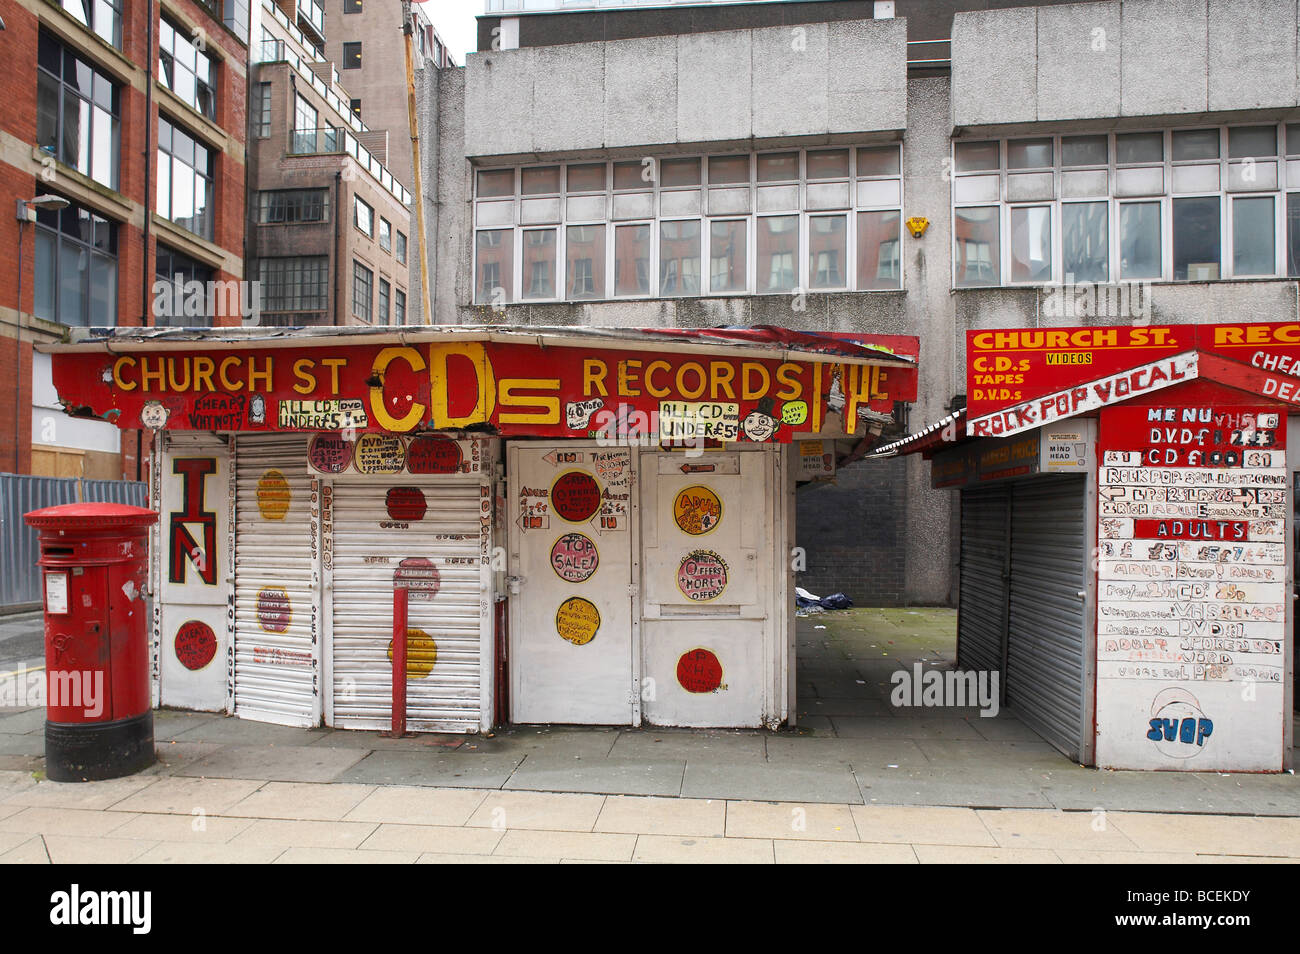 Church street CD and record shop in Manchester UK Stock Photo